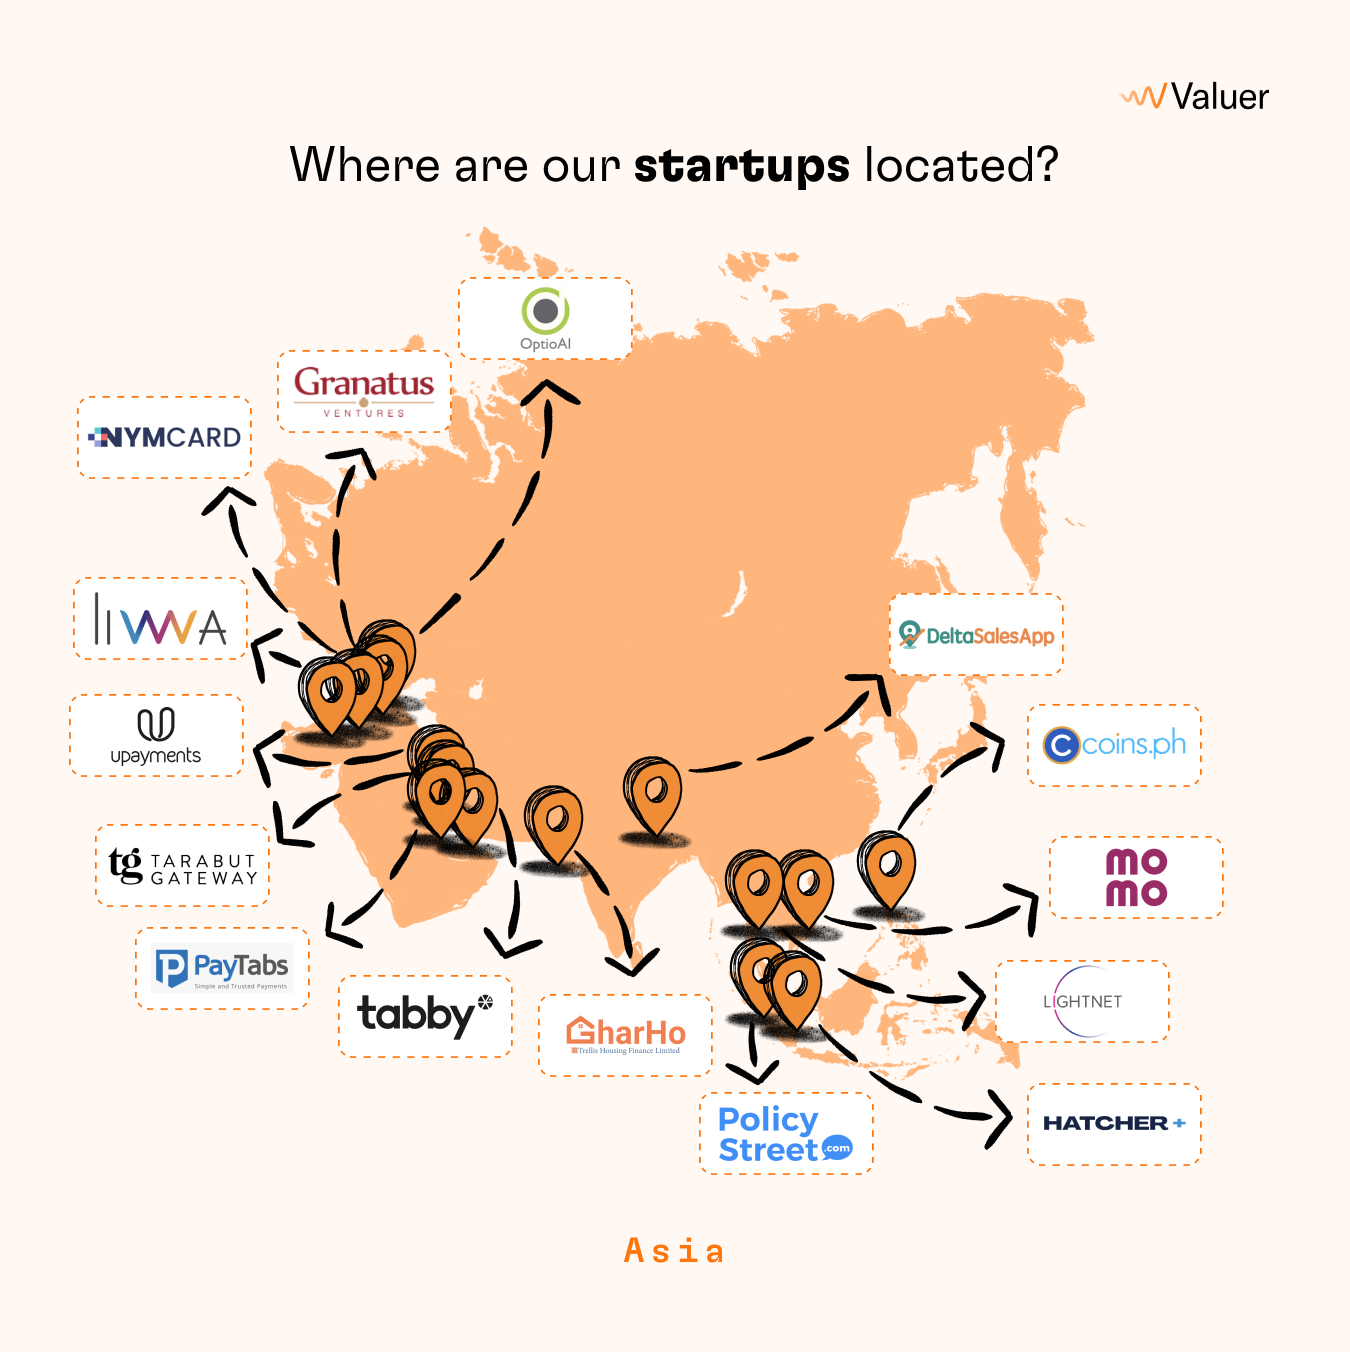 Where are our startups located_ - Map Image